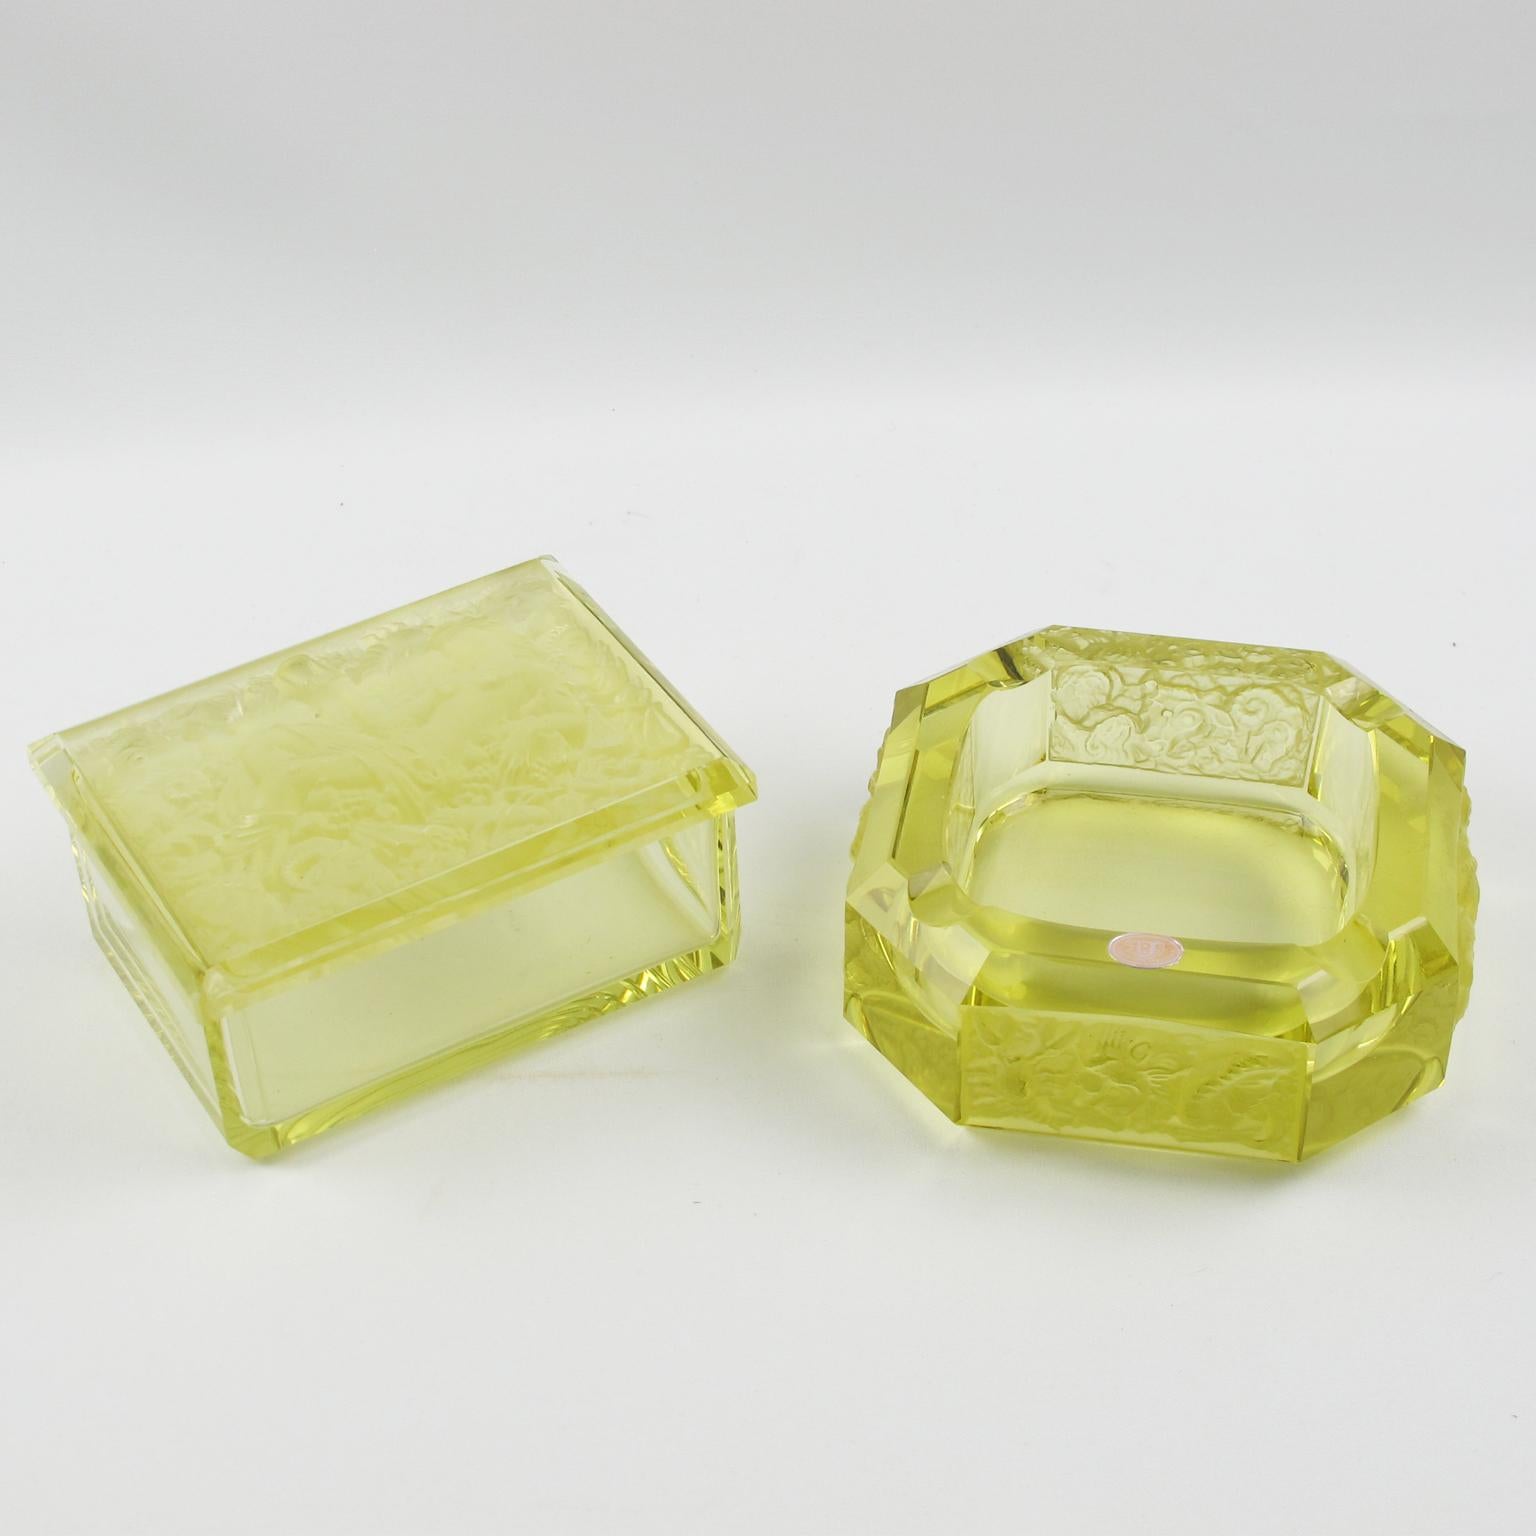 Lovely Bohemian Art Deco glass set for living space or office. Czech set featuring ashtray and decorative lidded box in cut and molded thick and heavy glass. Yellow ouraline Vaseline color. The box has a molded design on top of the lid with nude